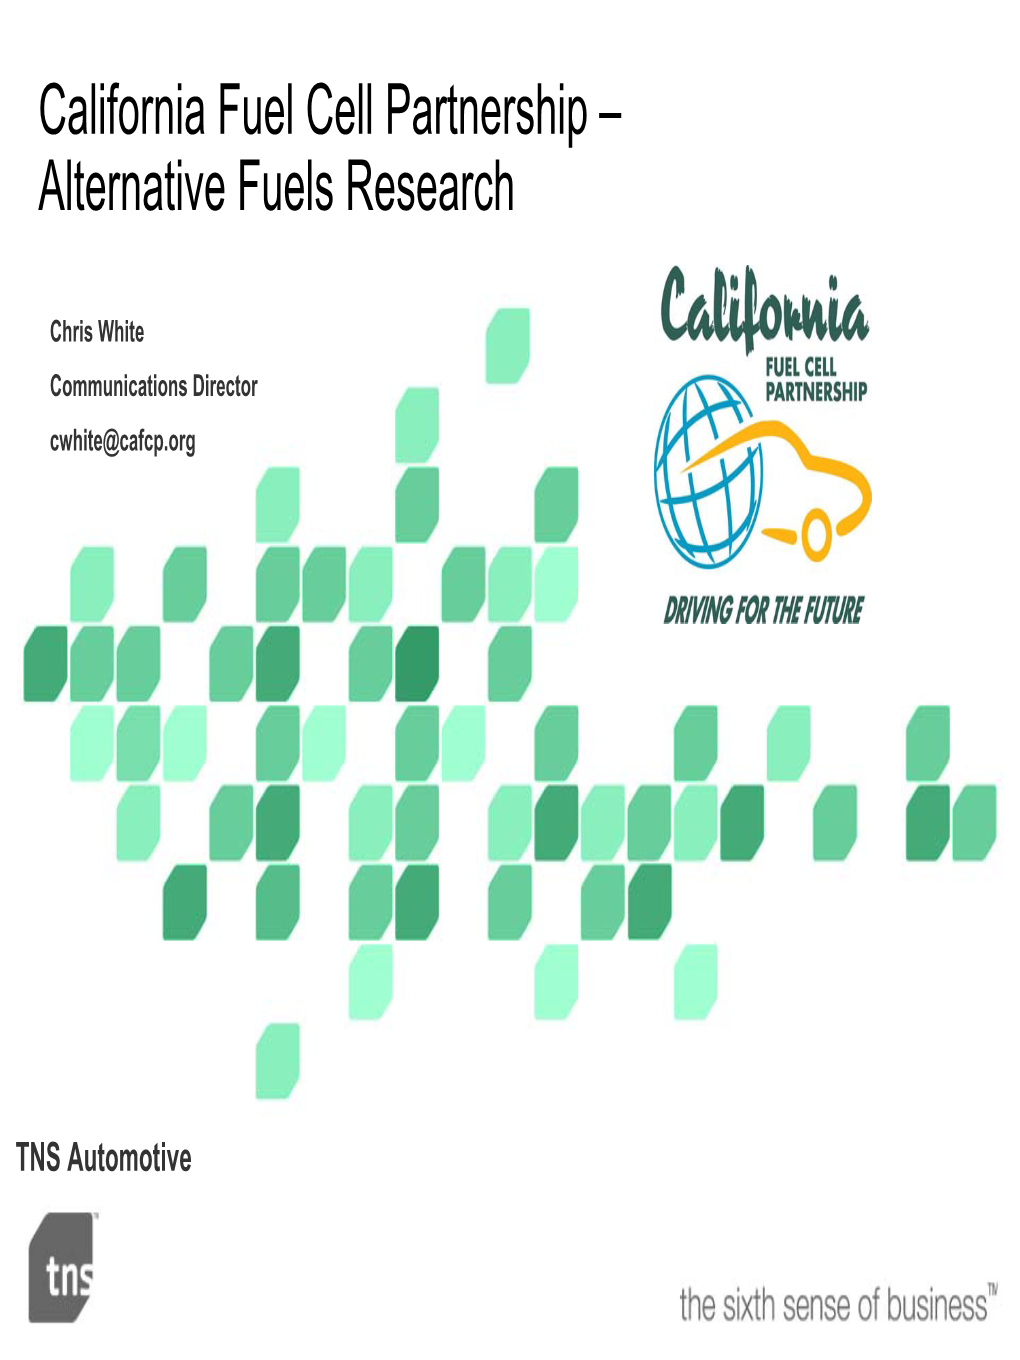 California Fuel Cell Partnership: Alternative Fuels Research